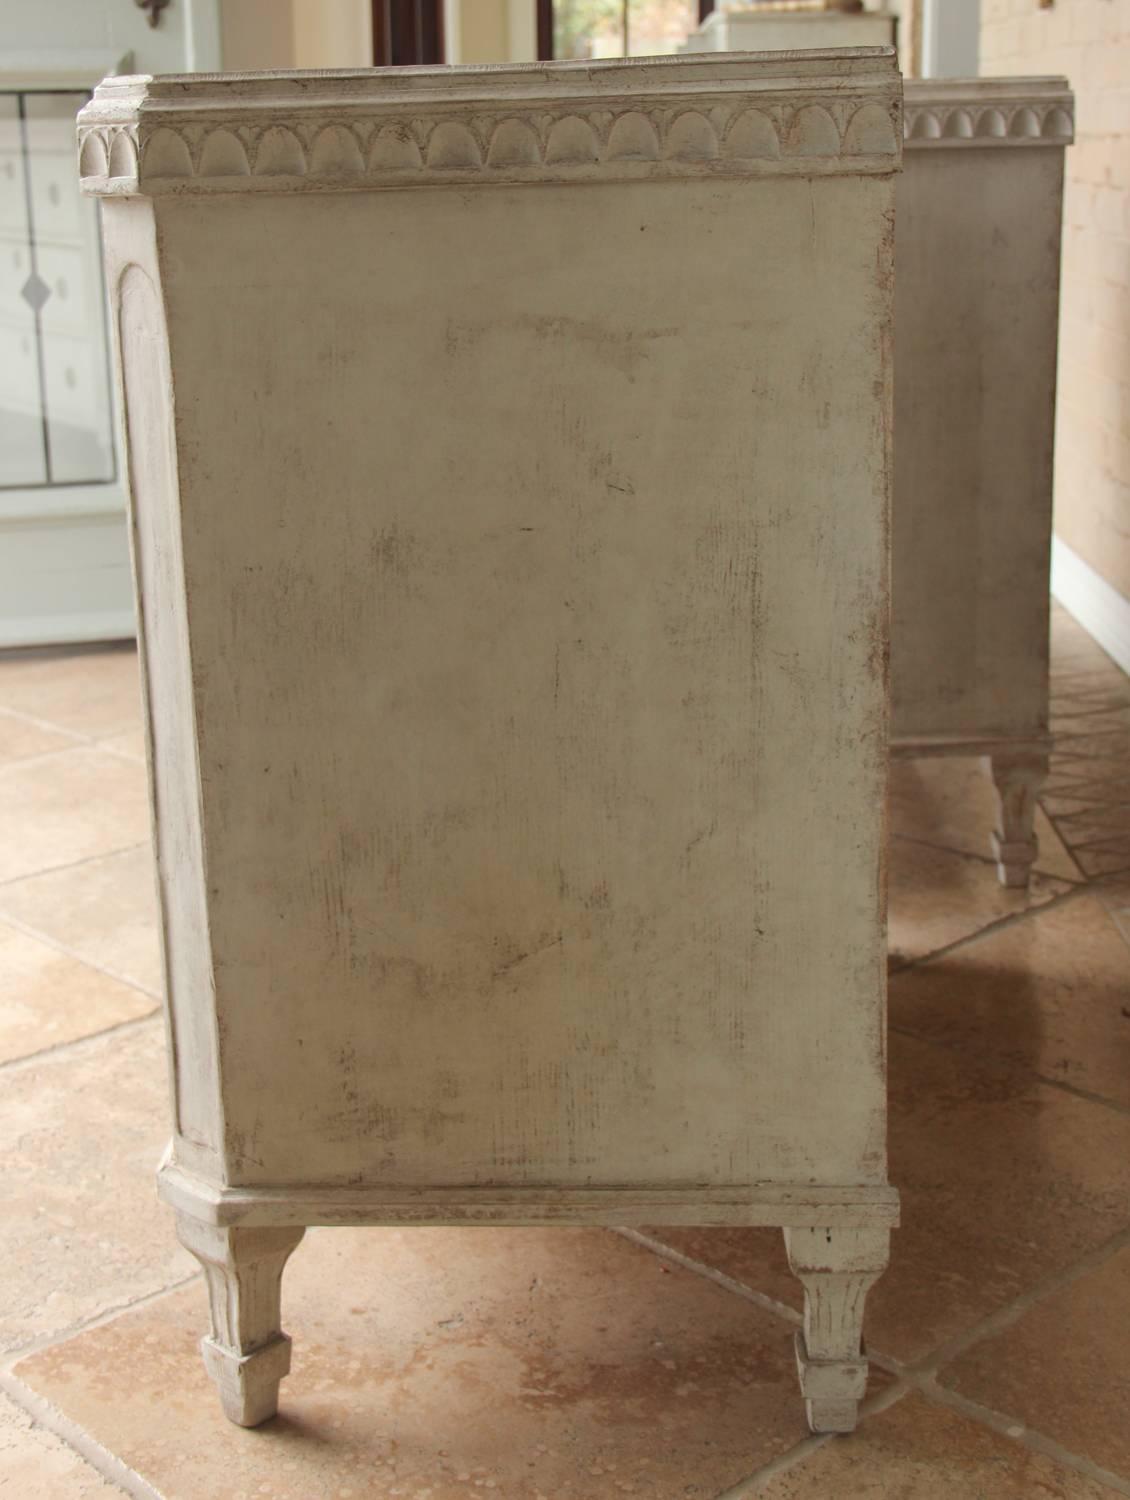 19th Century Swedish Gustavian Style Pair of Painted Bedside Chests